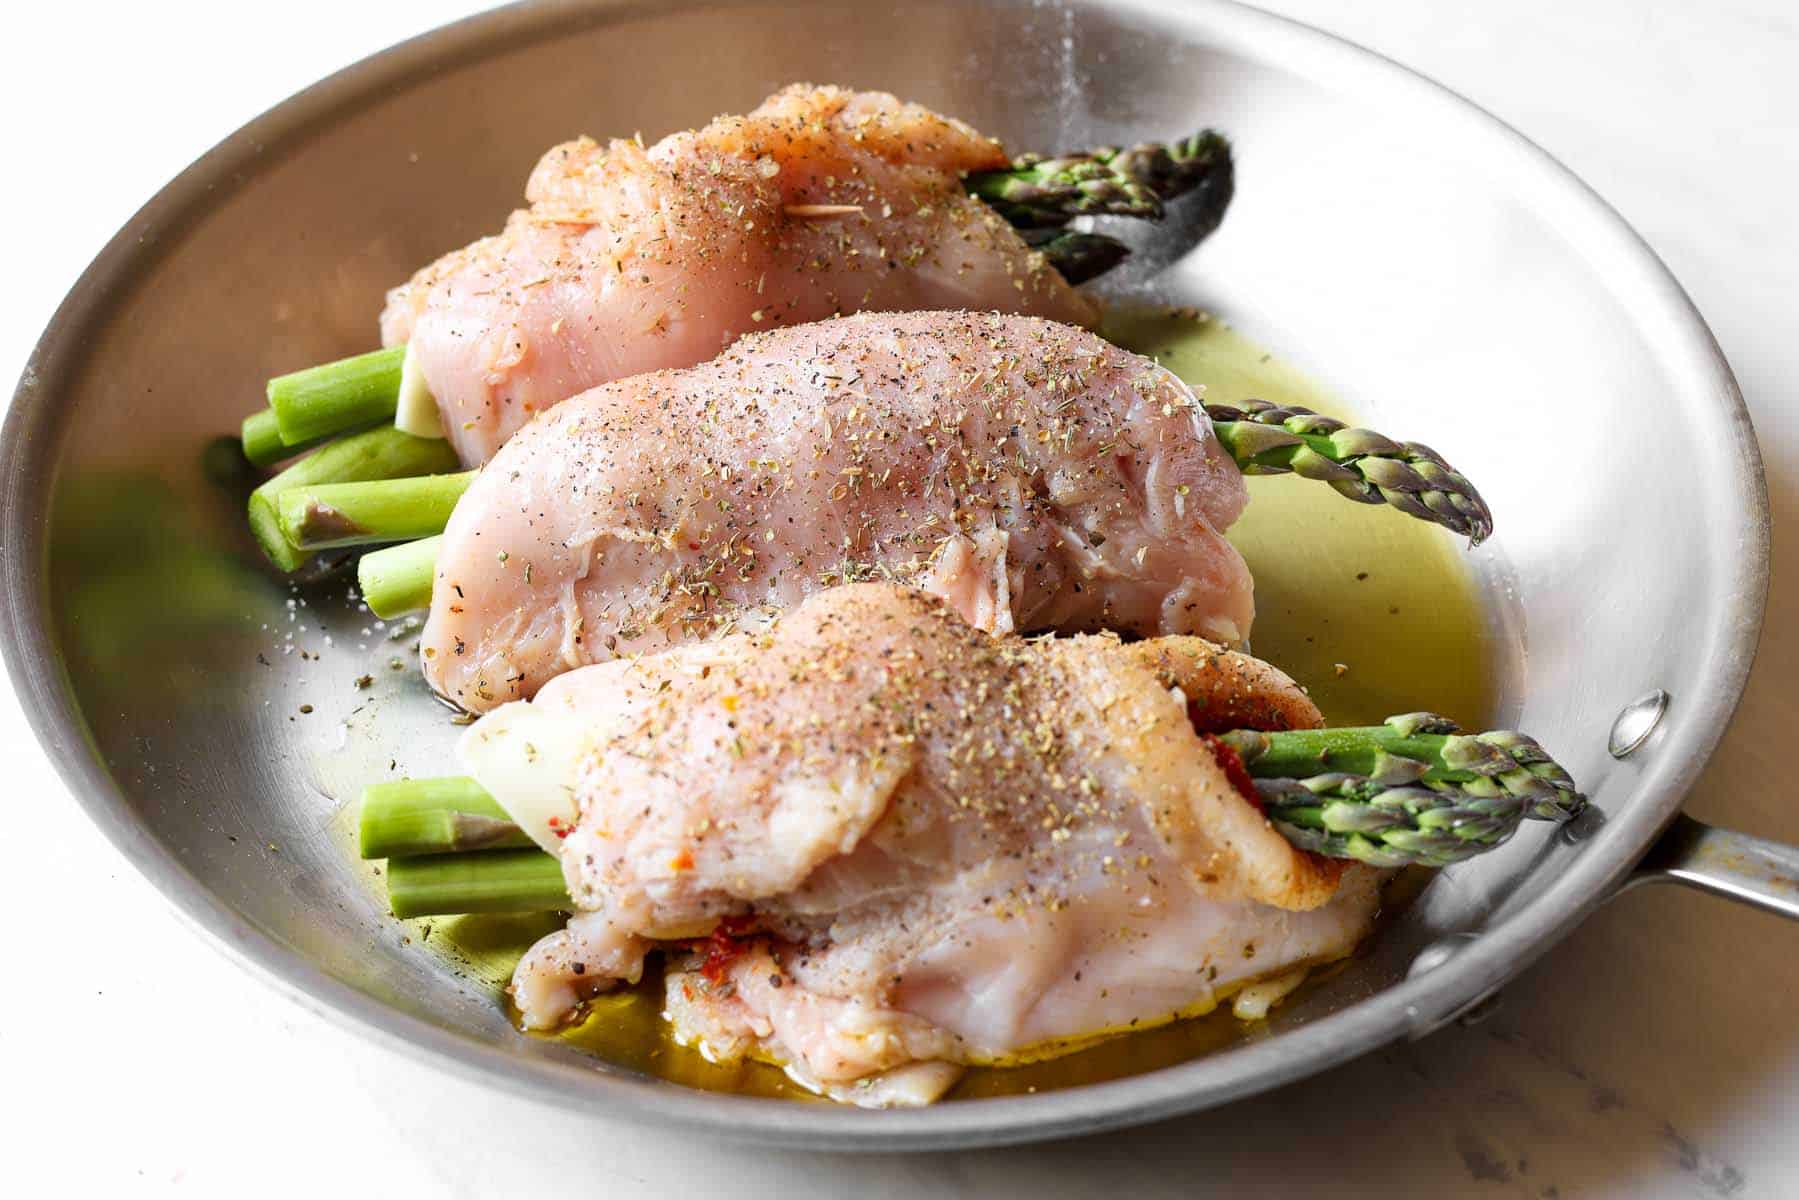 Chicken stuffed with asparagus in the pan